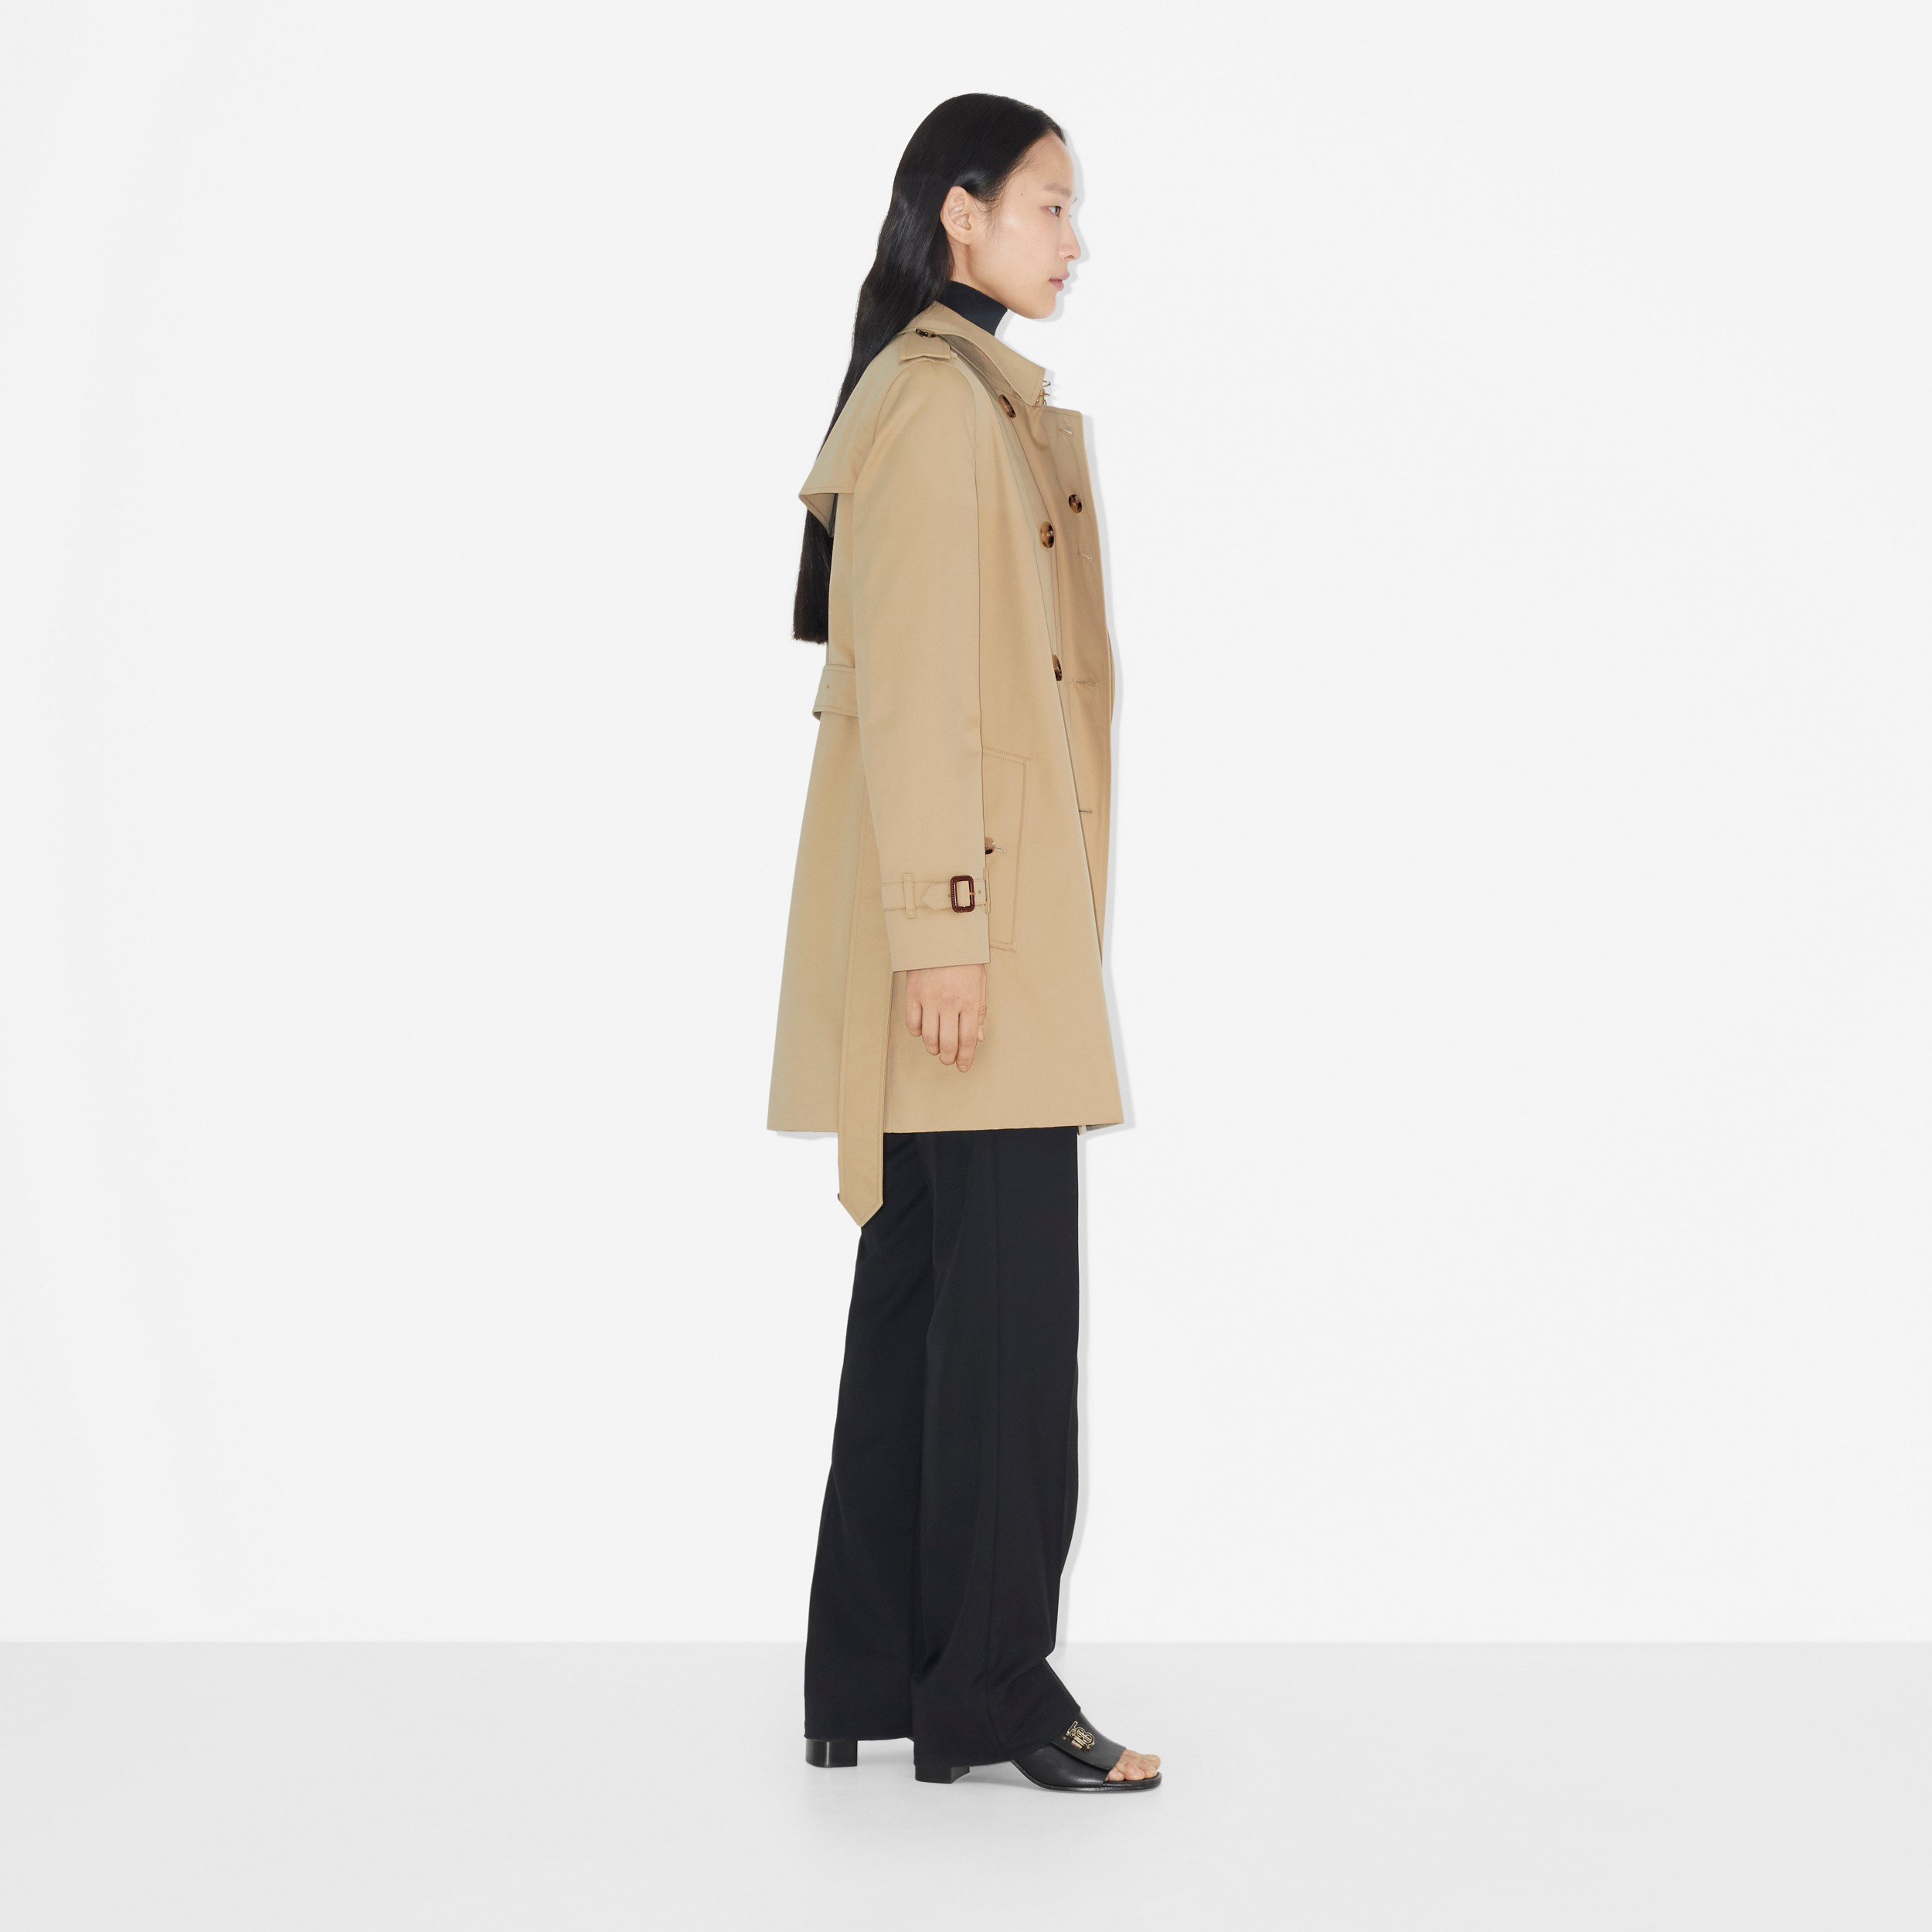 Kensington - Trench coat Heritage - Curto (Mel) - Mulheres | Burberry® oficial - 4